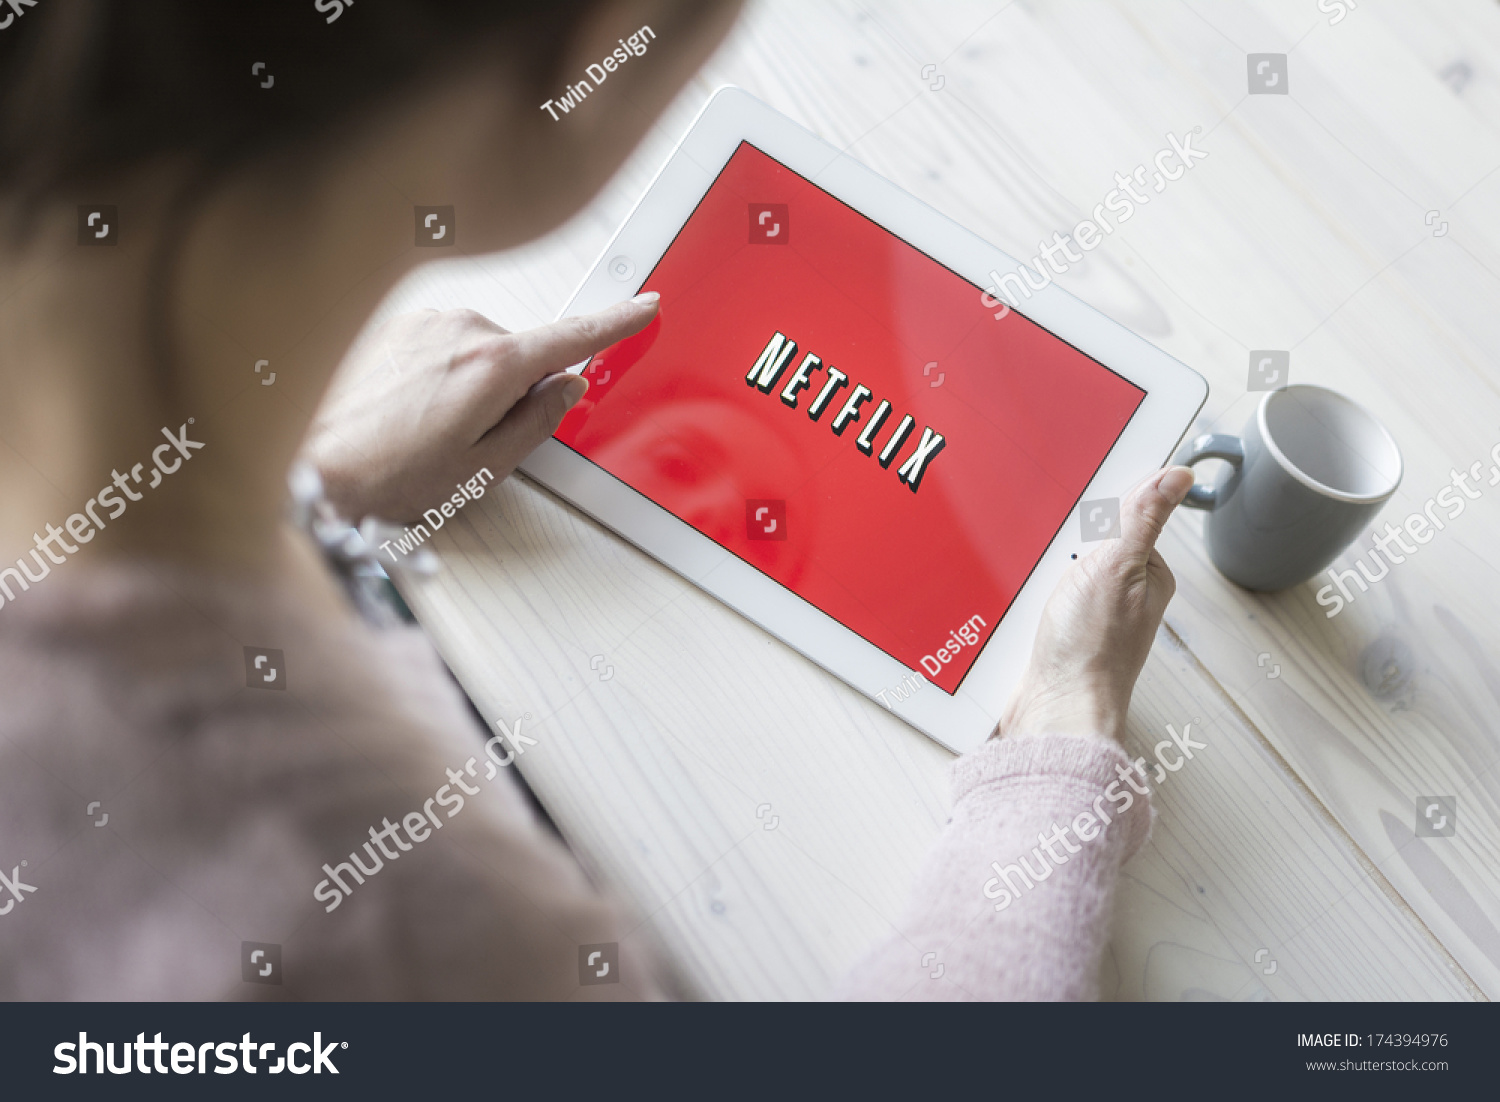 Netflix Is An American Provider Of On